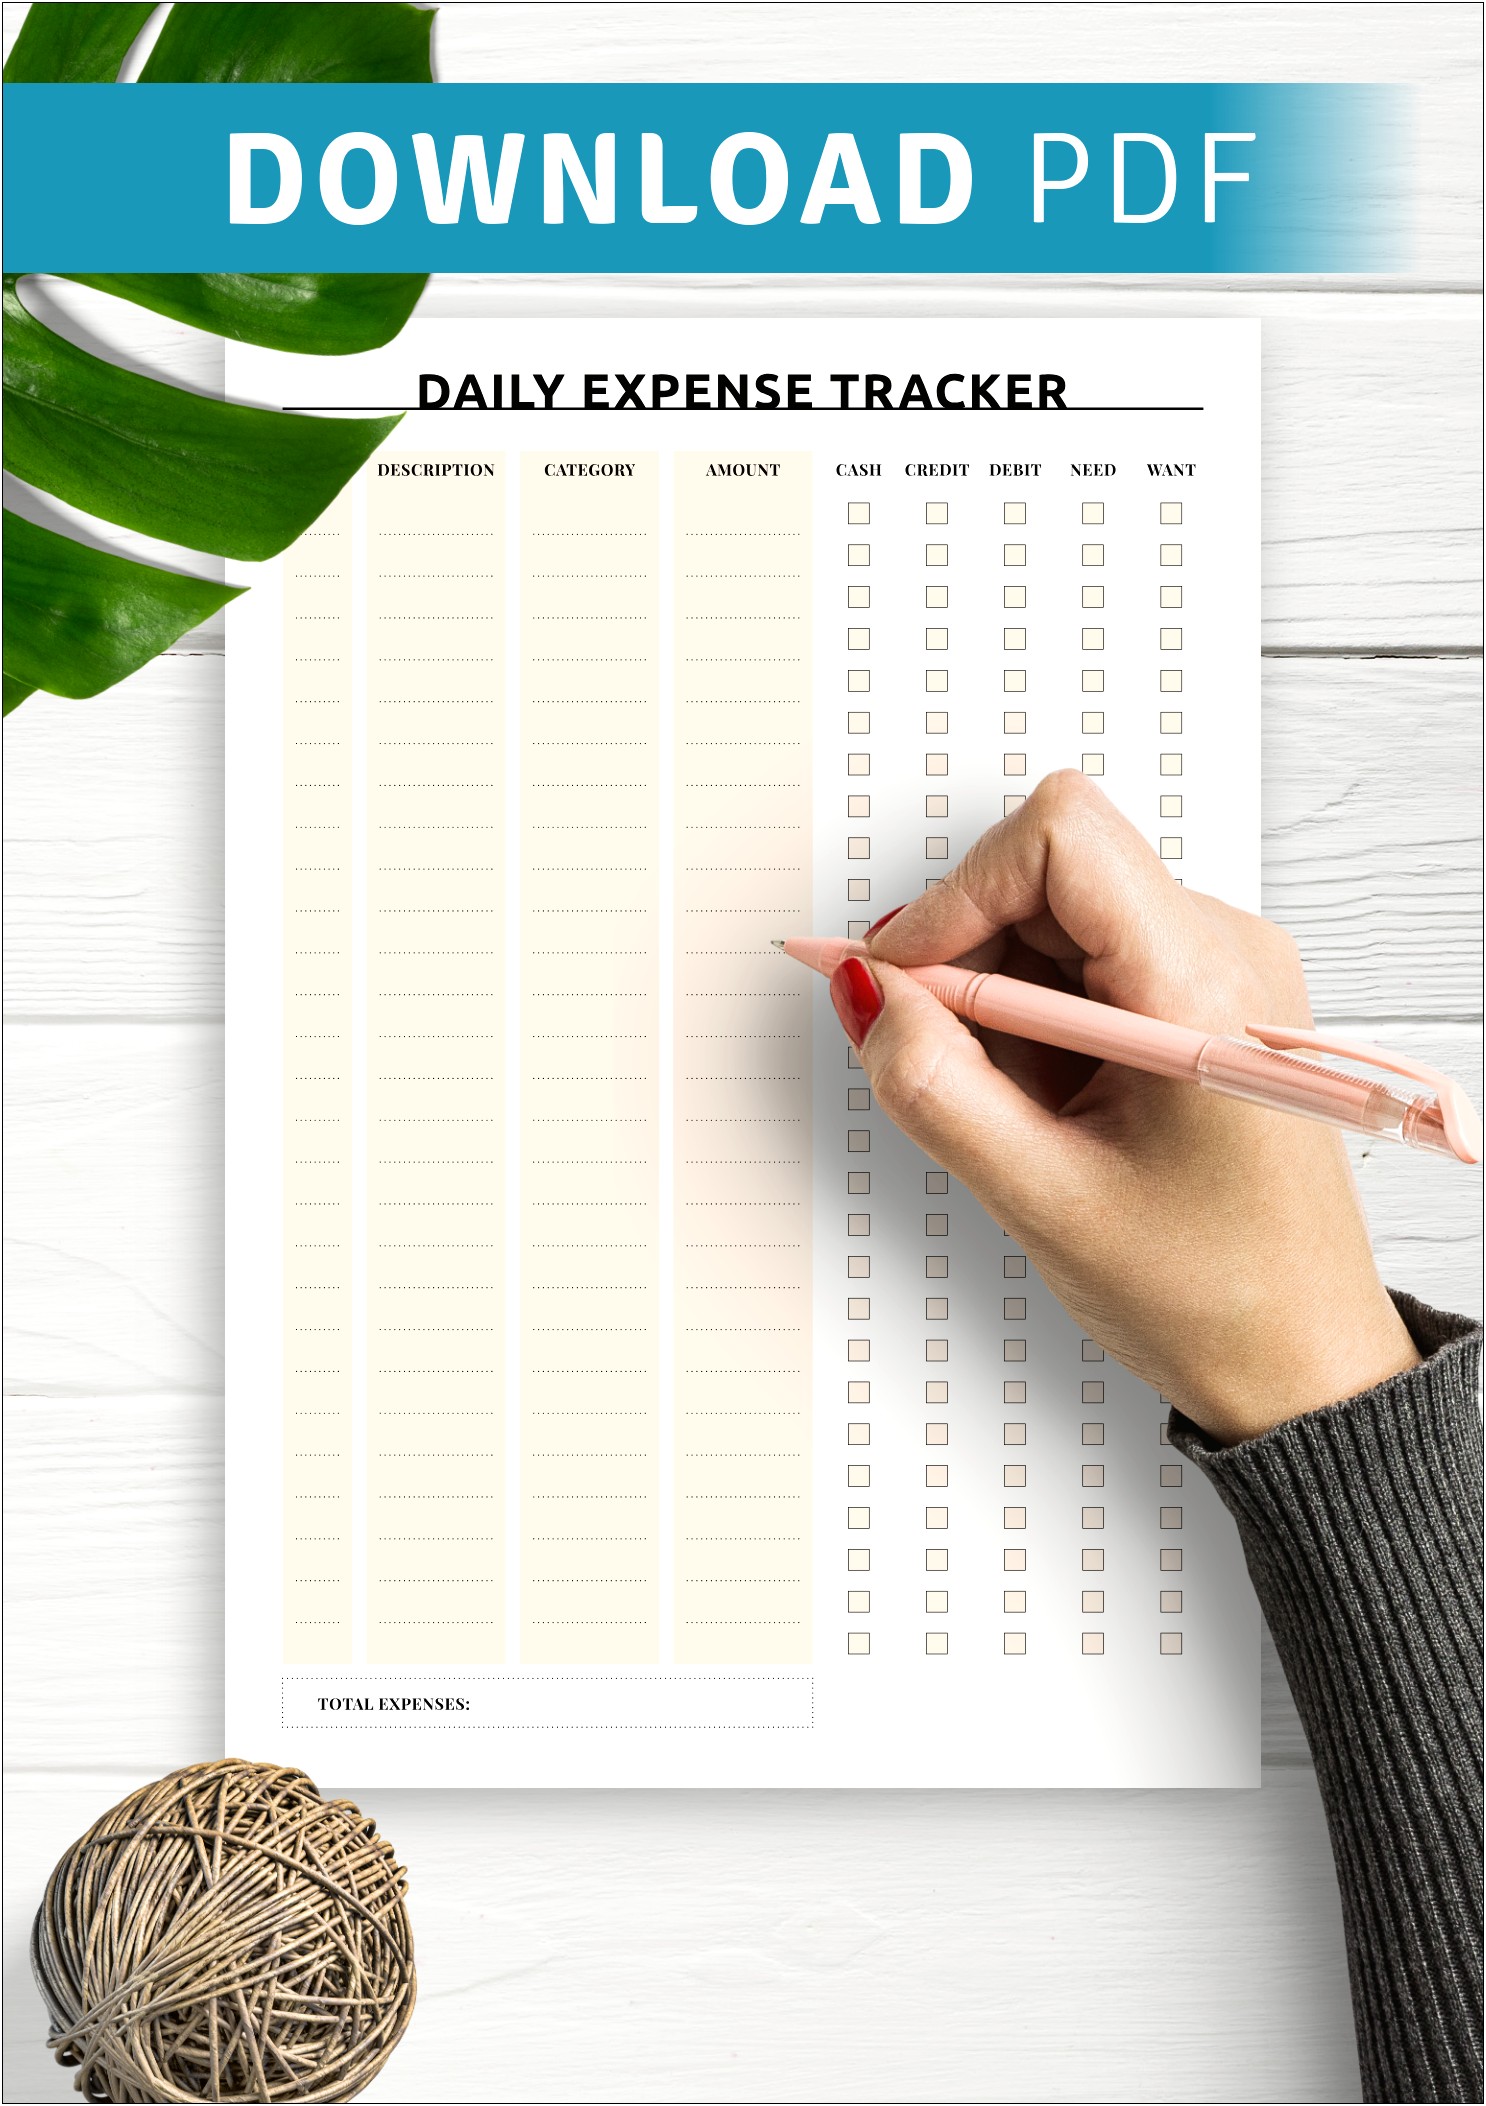 Daily Expense Tracker Template Free Printable